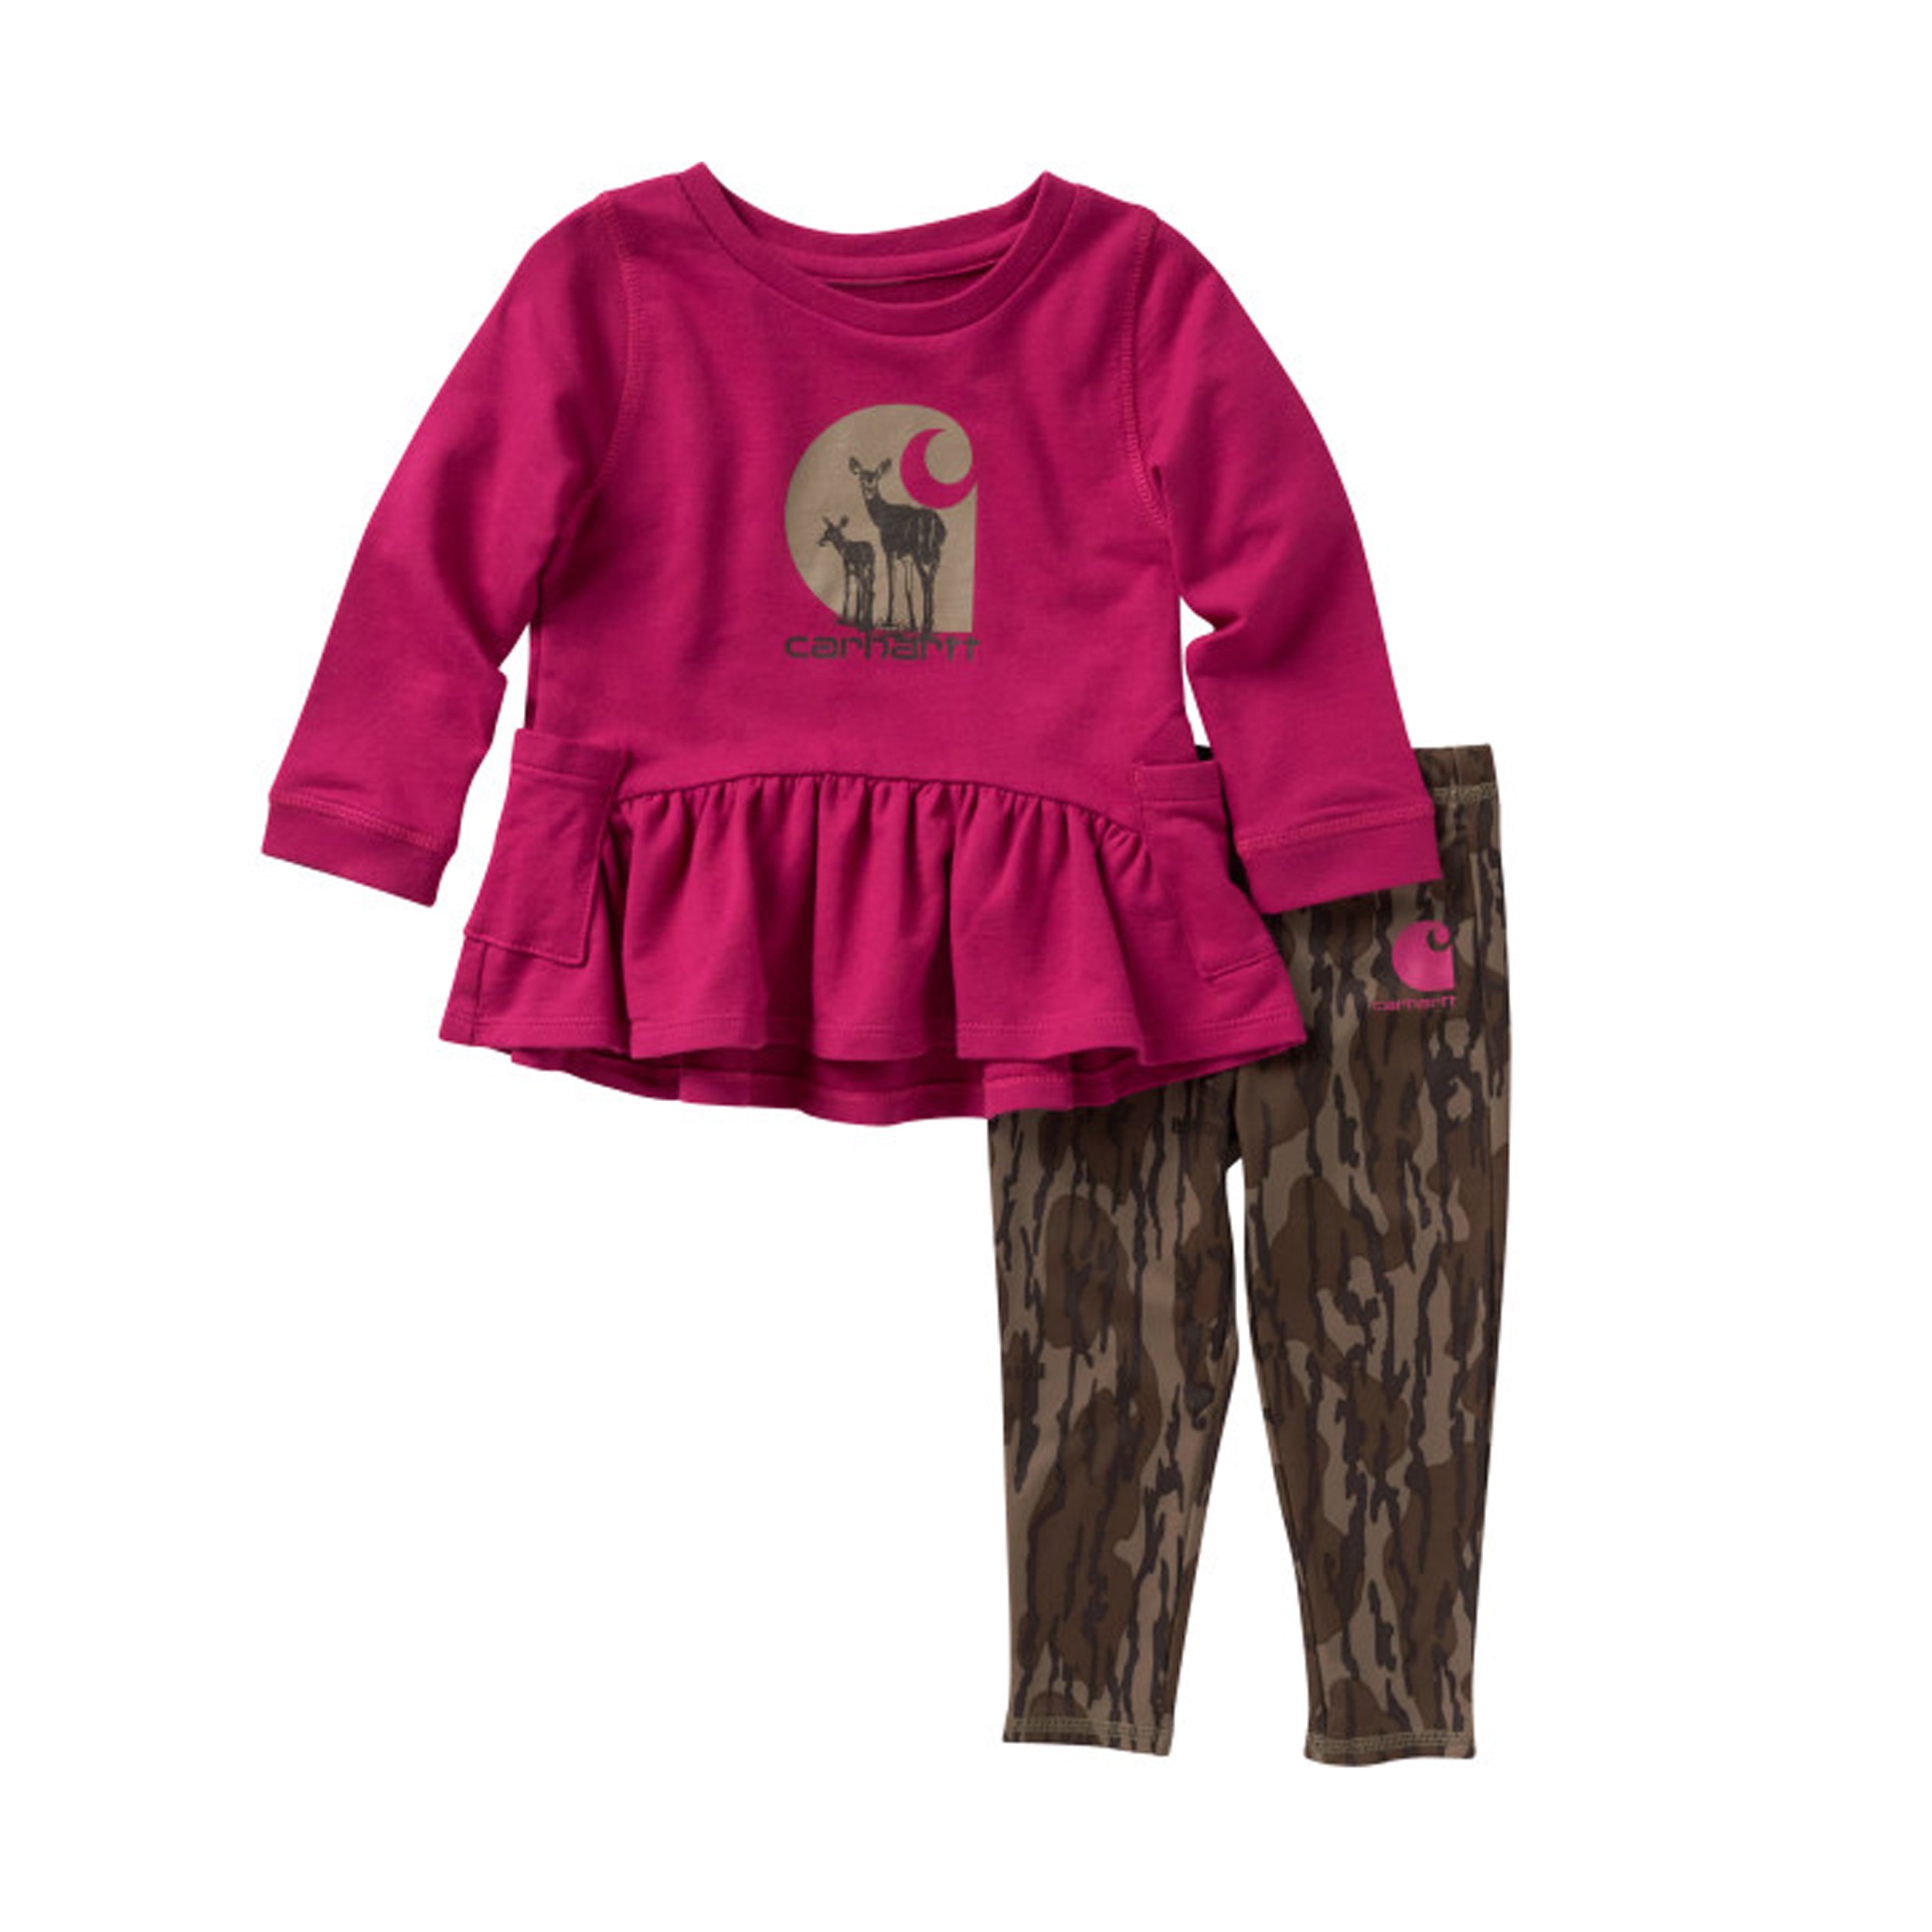 Shop Carhartt Unisex Baby Girl Dresses & Rompers by Cherie-Cherry